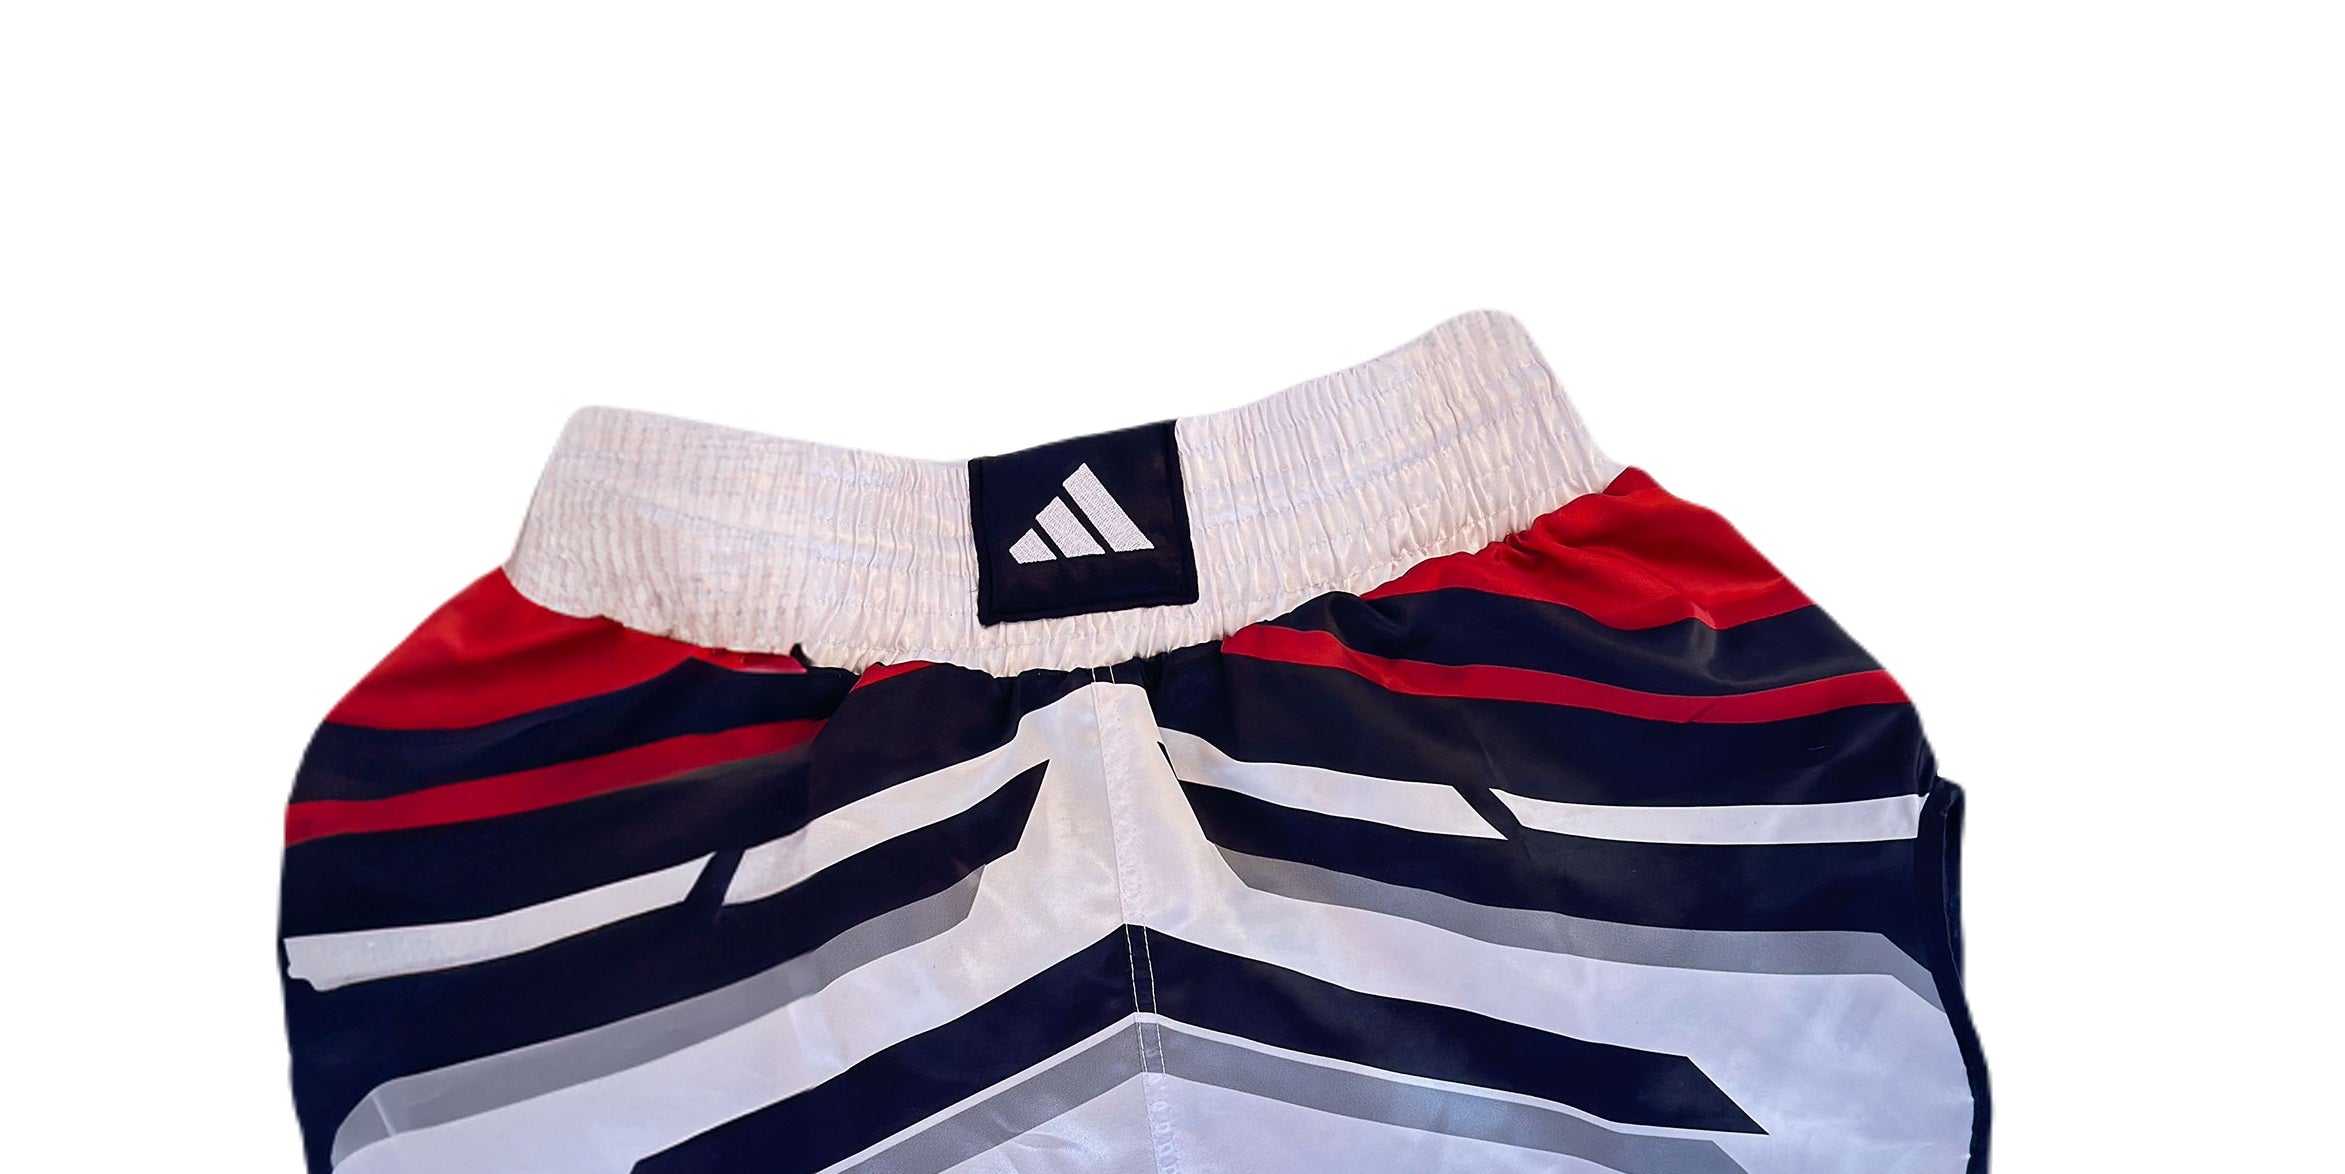 Adidas combat sports shorts for kickboxing and boxing, featuring lightweight and breathable materia